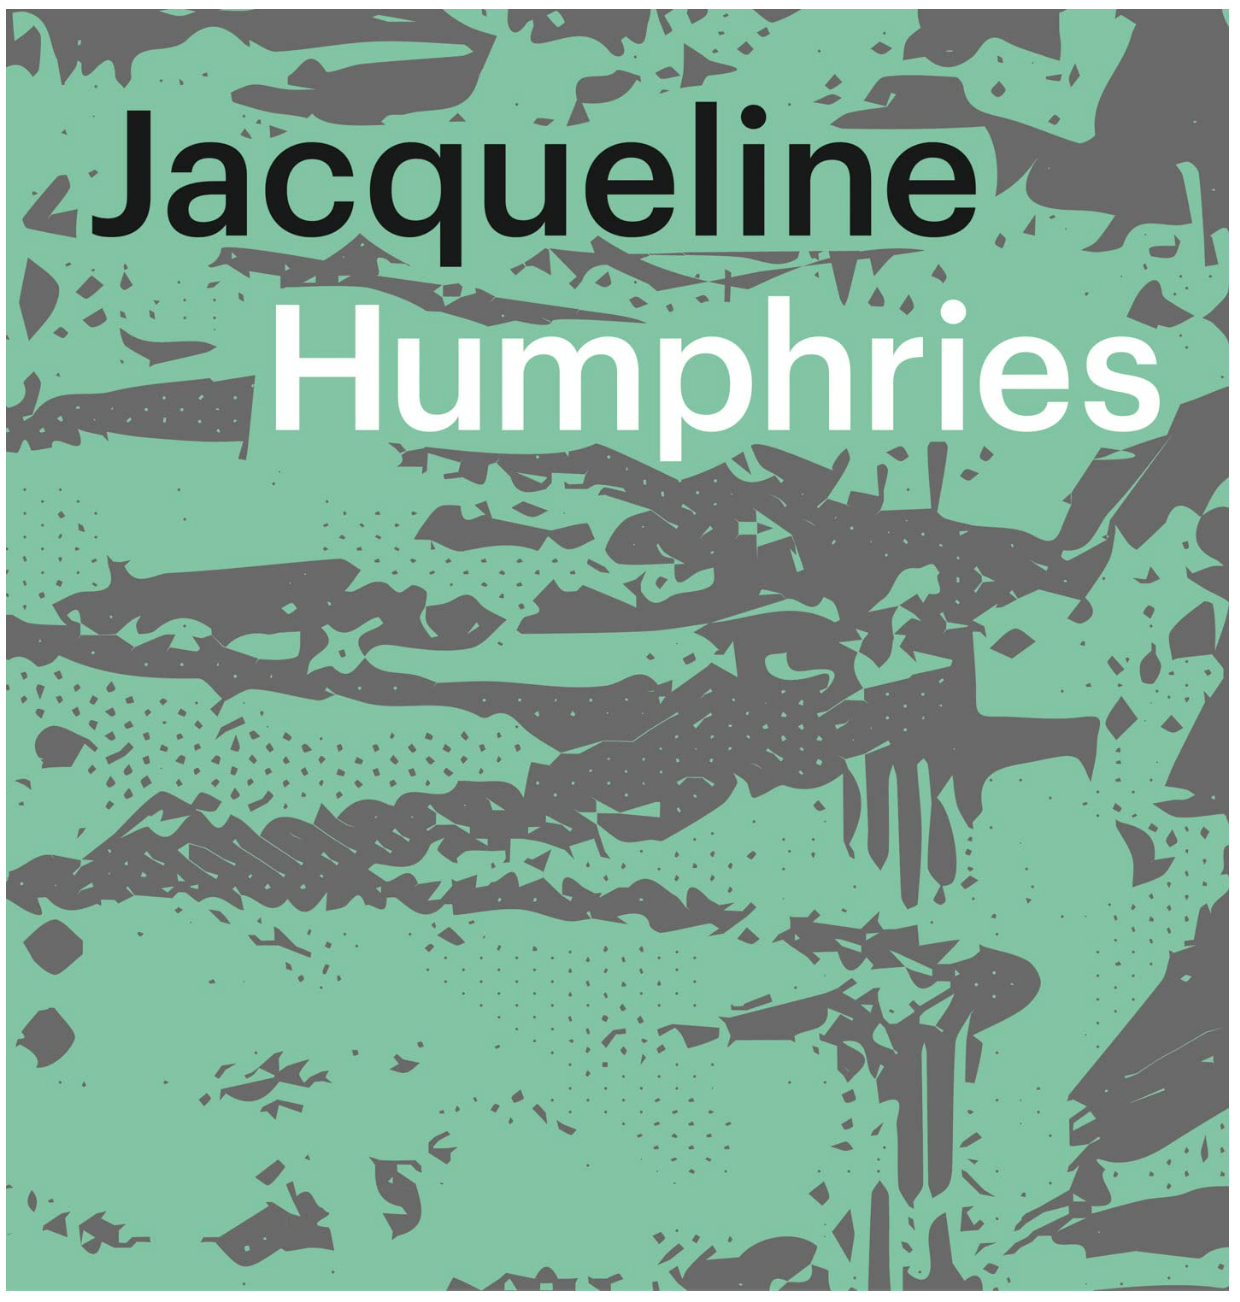 ‘Jacqueline Humphries’ book cover